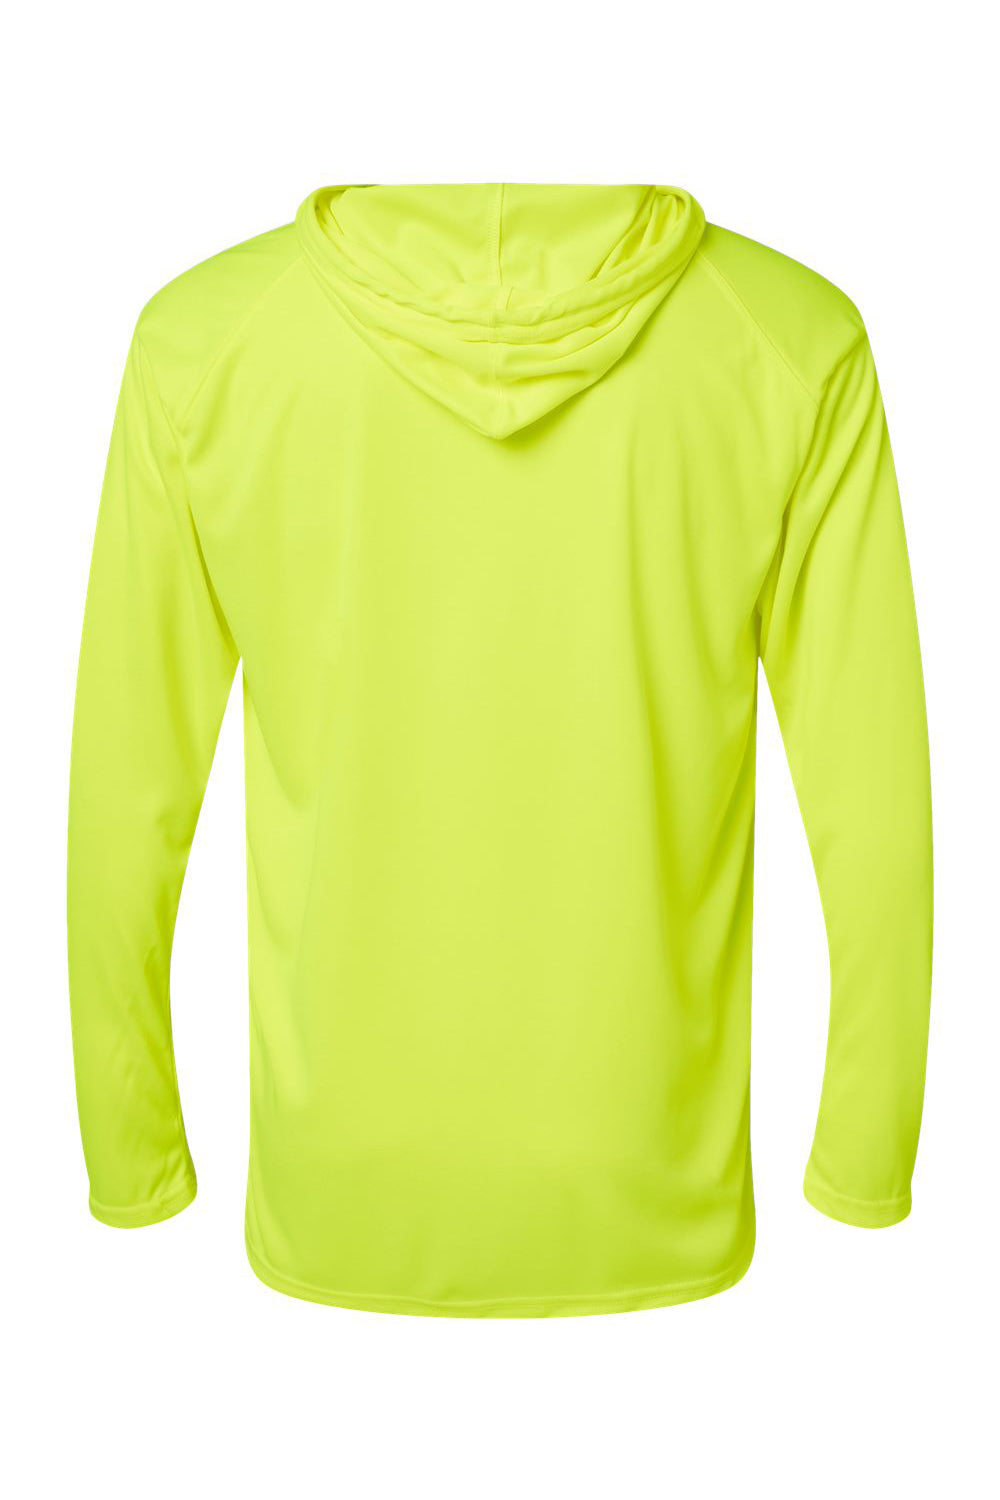 Badger 4105 Mens B-Core Moisture Wicking Long Sleeve Hooded T-Shirt Hoodie Safety Yellow Flat Back